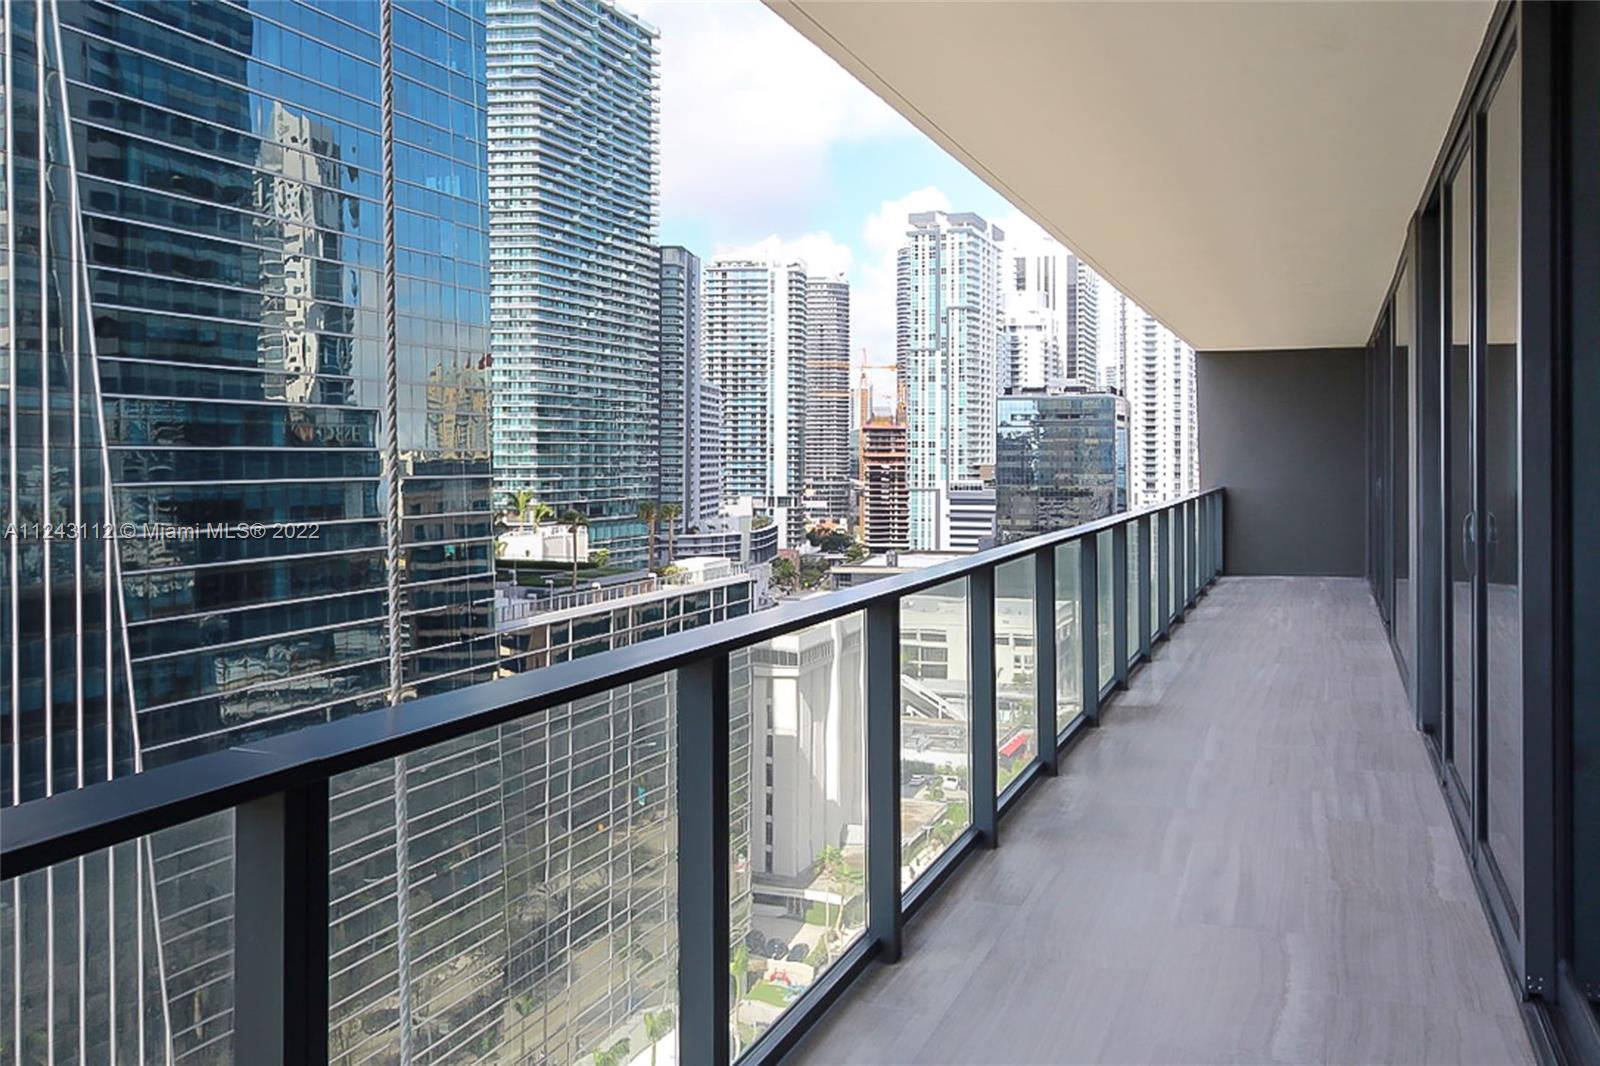 COME AND LIVE AT THE BRAND NEW, SOFISTICATED ECHO BRICKELL. FULLY FURNISHED UNIT WITH MARBLE FLOORS. UNIT OFFERS EXPANSIVE BALCONY WITH OUTDOOR BBQ AND BEAUTIFUL SUNSET VIEWS.ENJOY TOP OF THE LINE AMENITIES AND LIVE IN THE BEST AREA OF BRICKELL!!!